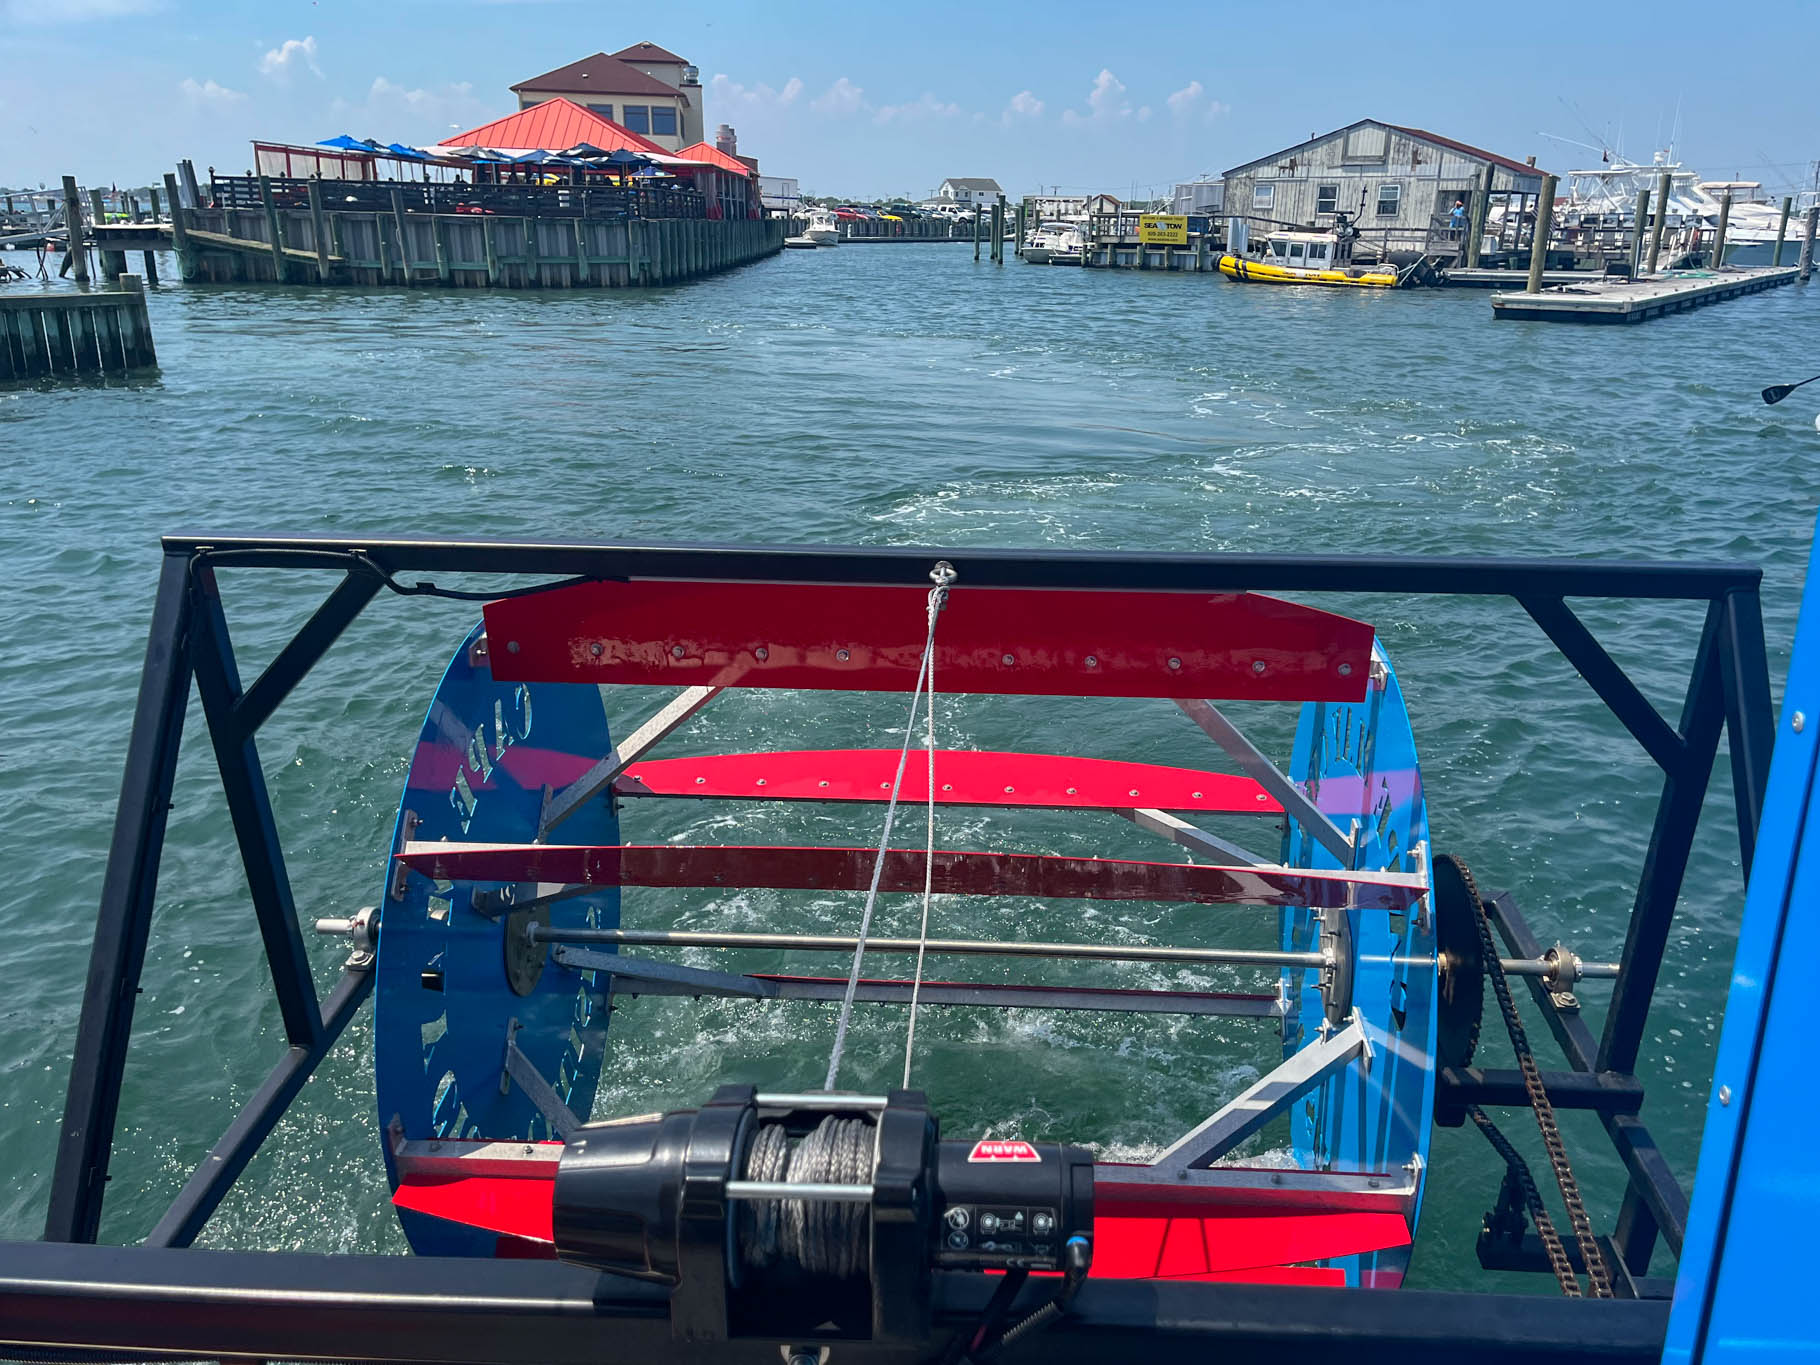 Looking at the dock and wheel spins as you paddle the Cape May Cycle Cruises boat.